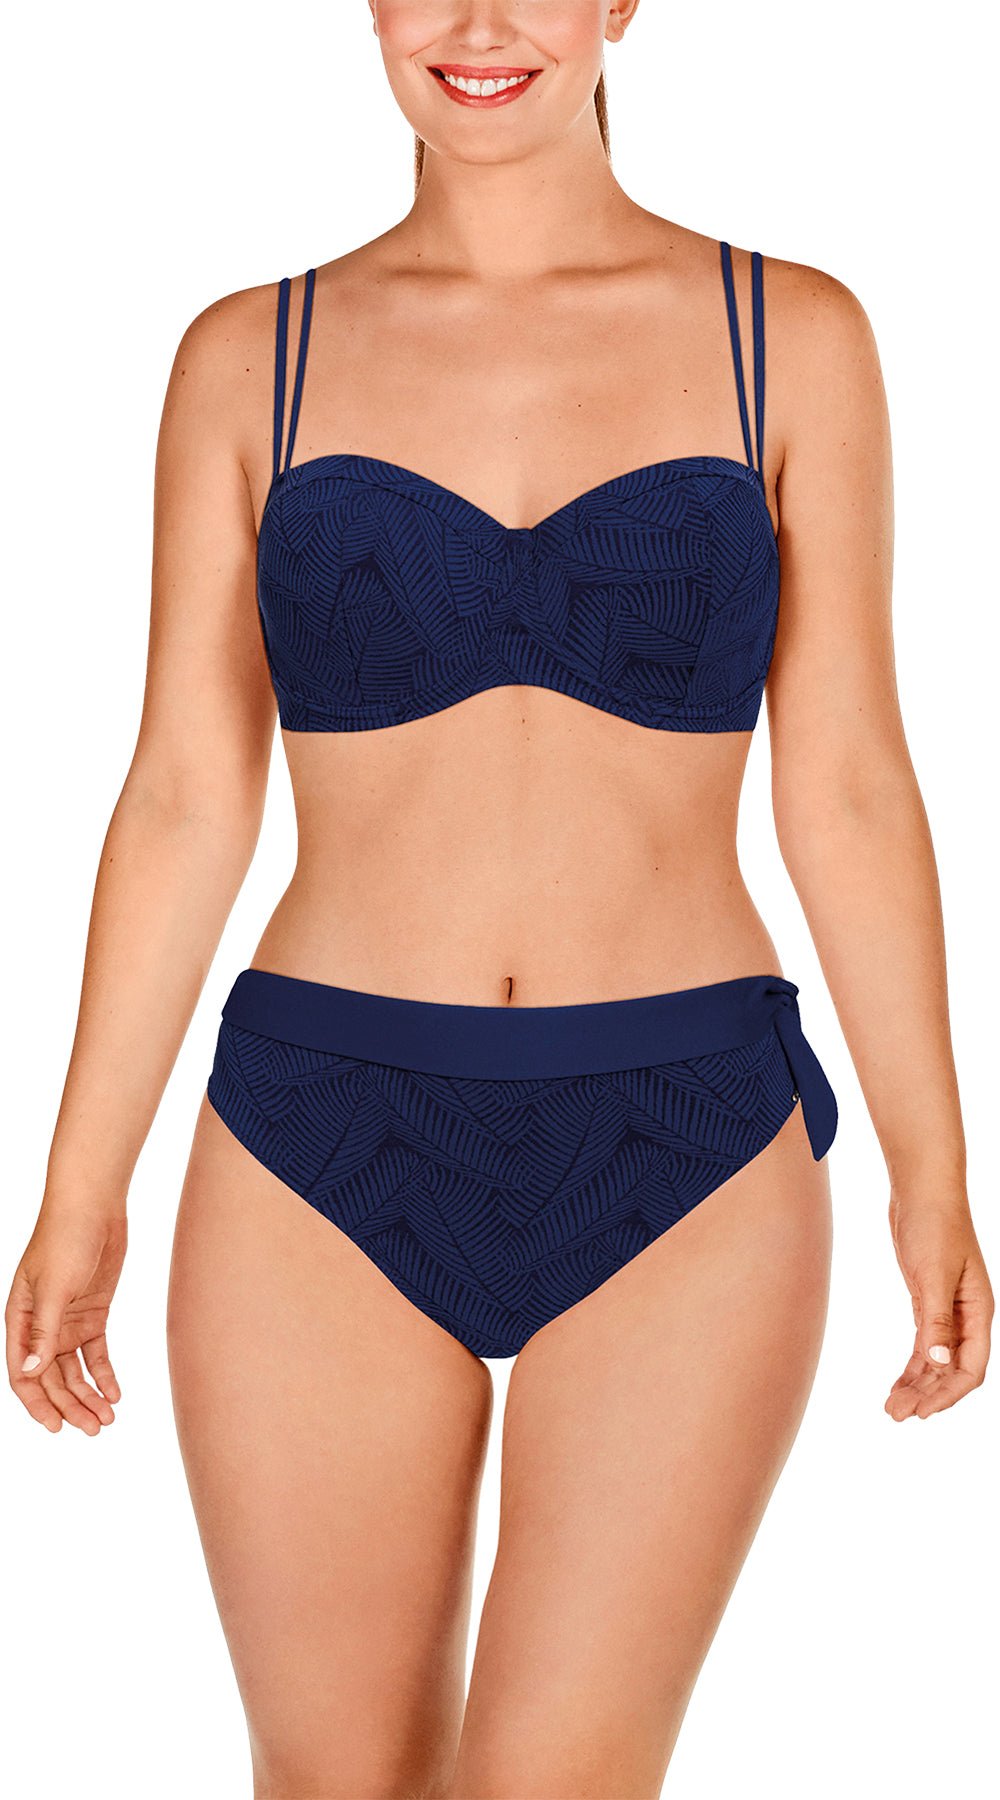 Textured D Cup Underwired Top & High Waist Fold over bottoms - Bare Essentials